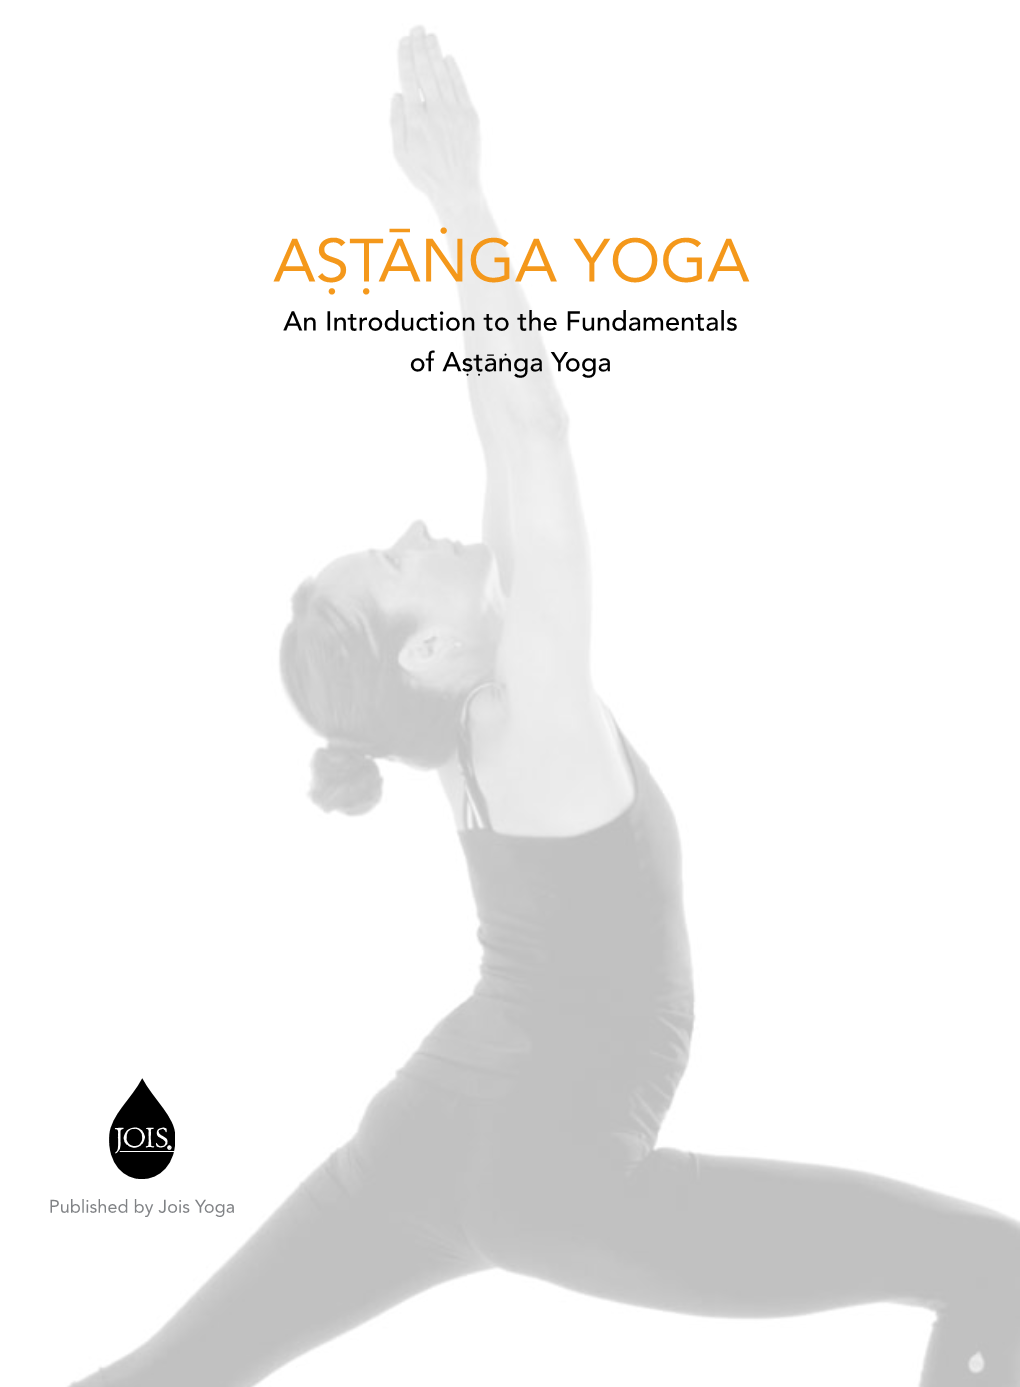 An Introduction to the Fundamentals of Astanga Yoga